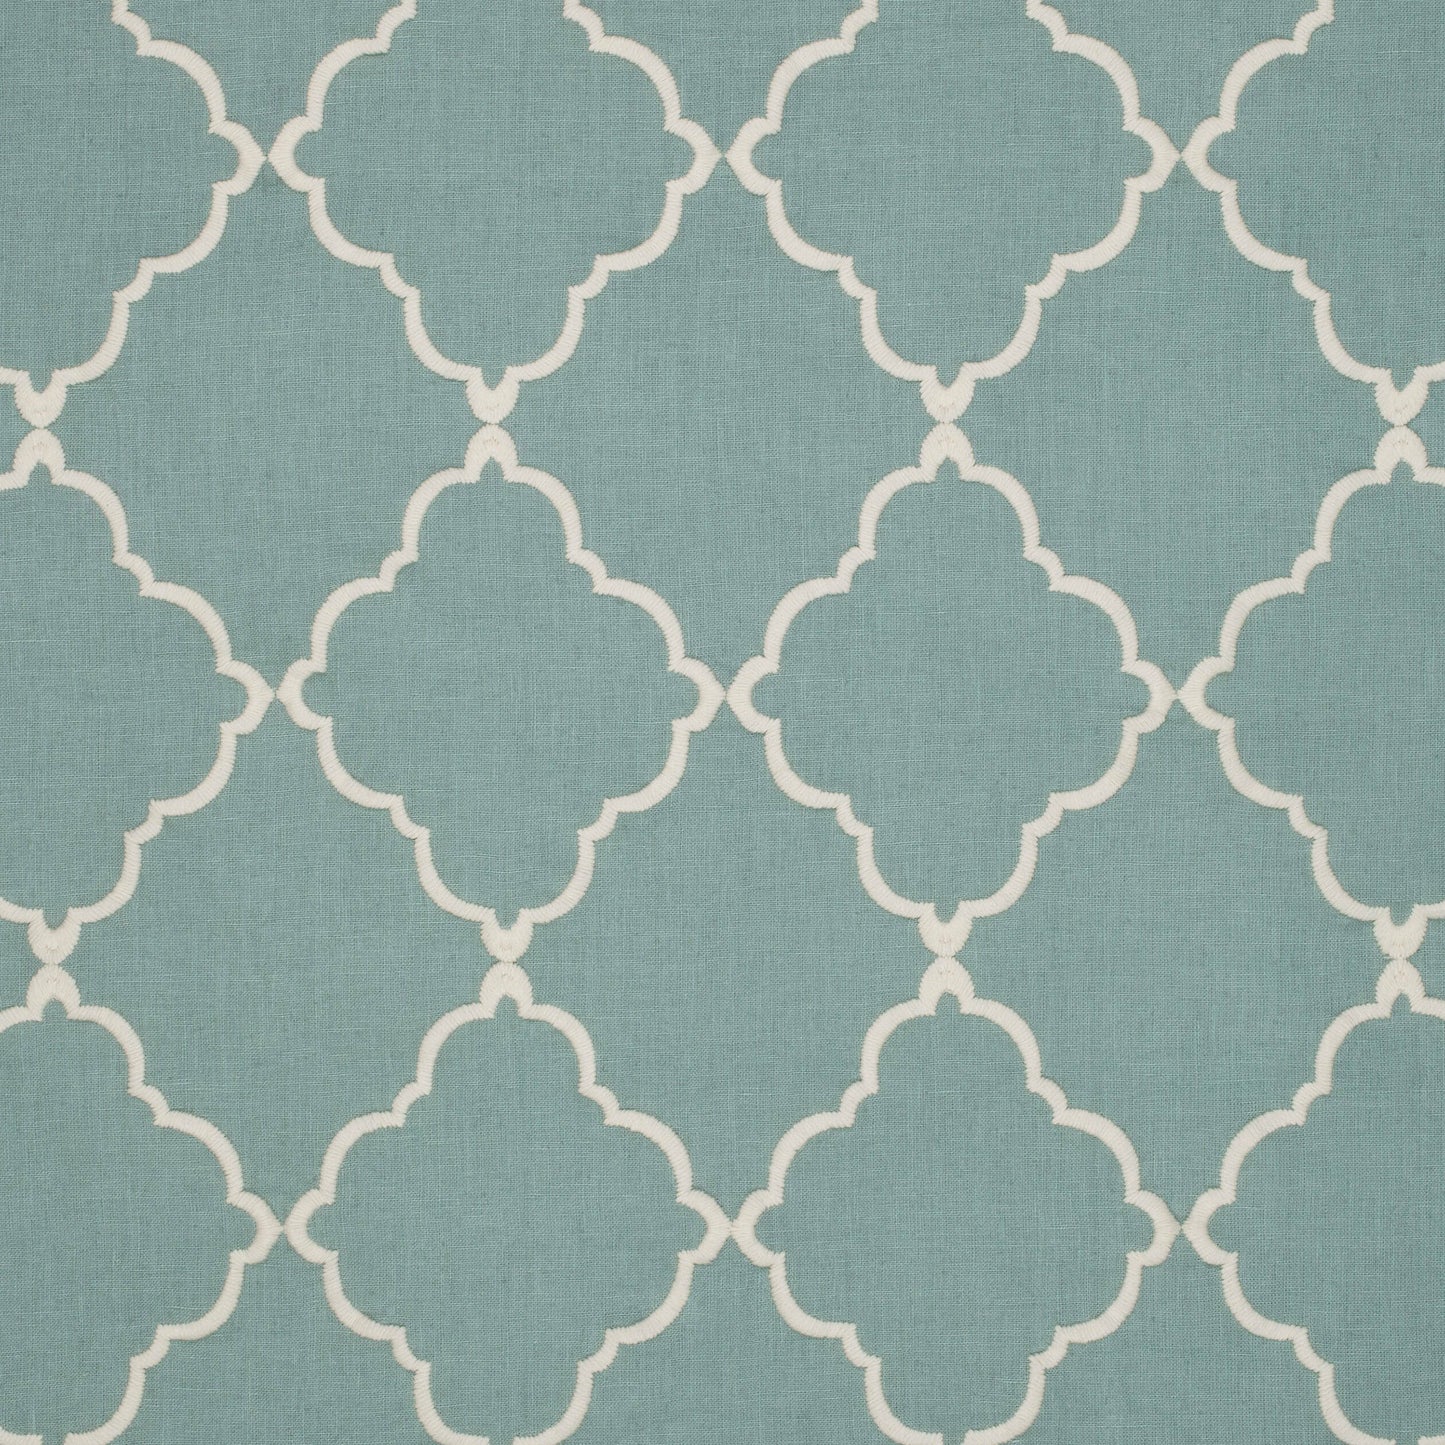 Purchase  Ann French Fabric Pattern number AF26140  pattern name  Tunisia Trellis Embroidery